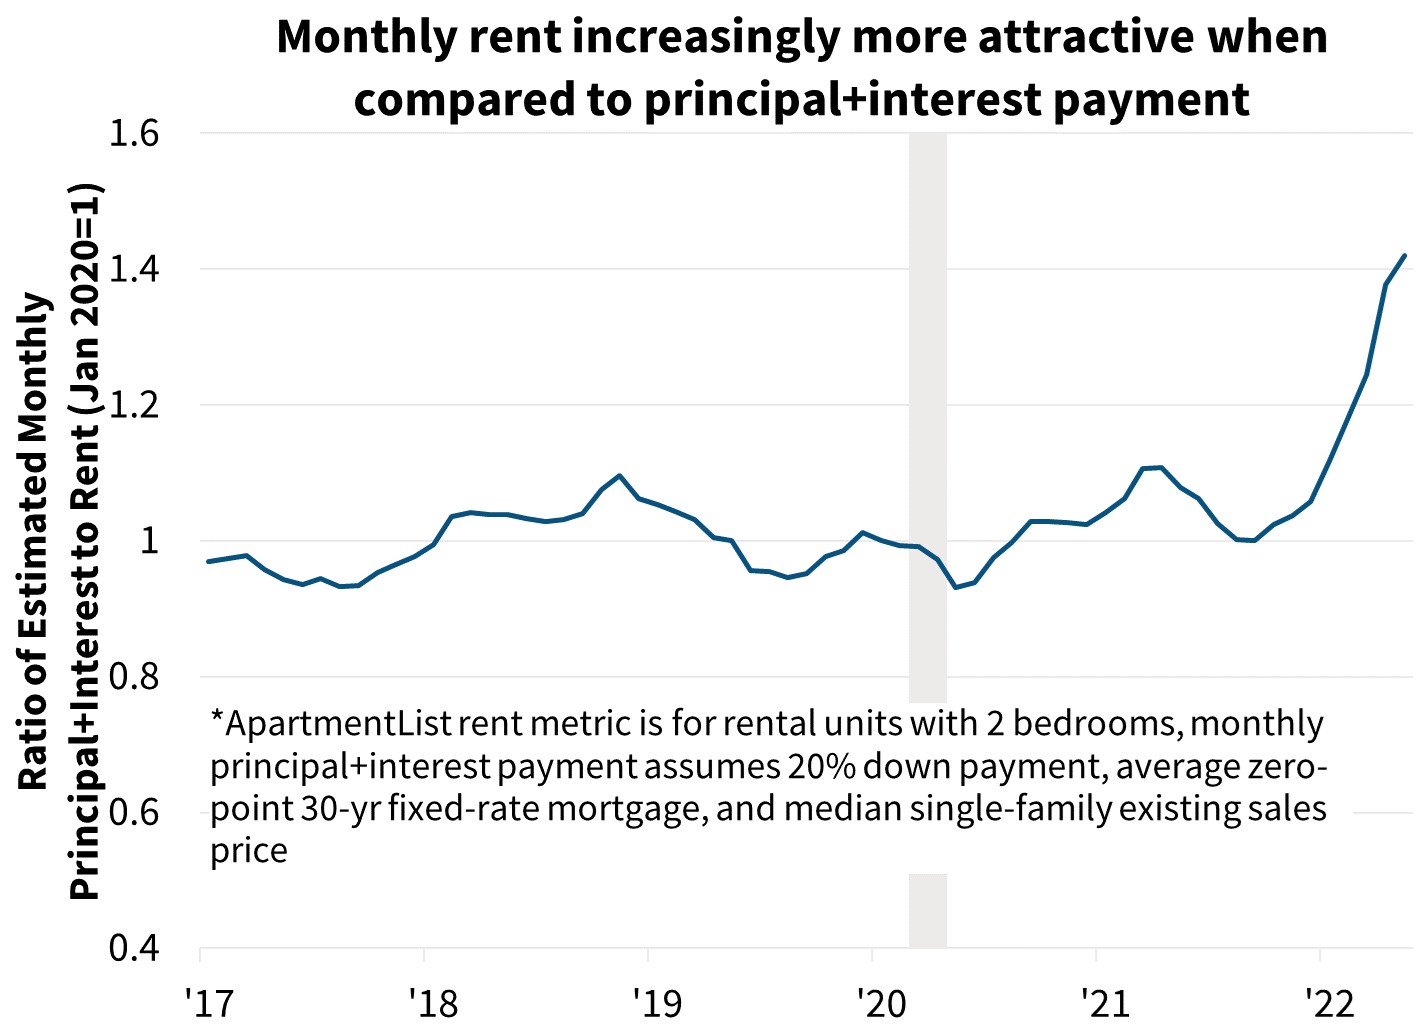  Monthly rent increasingly more attractive when compared to principal + interest rate 